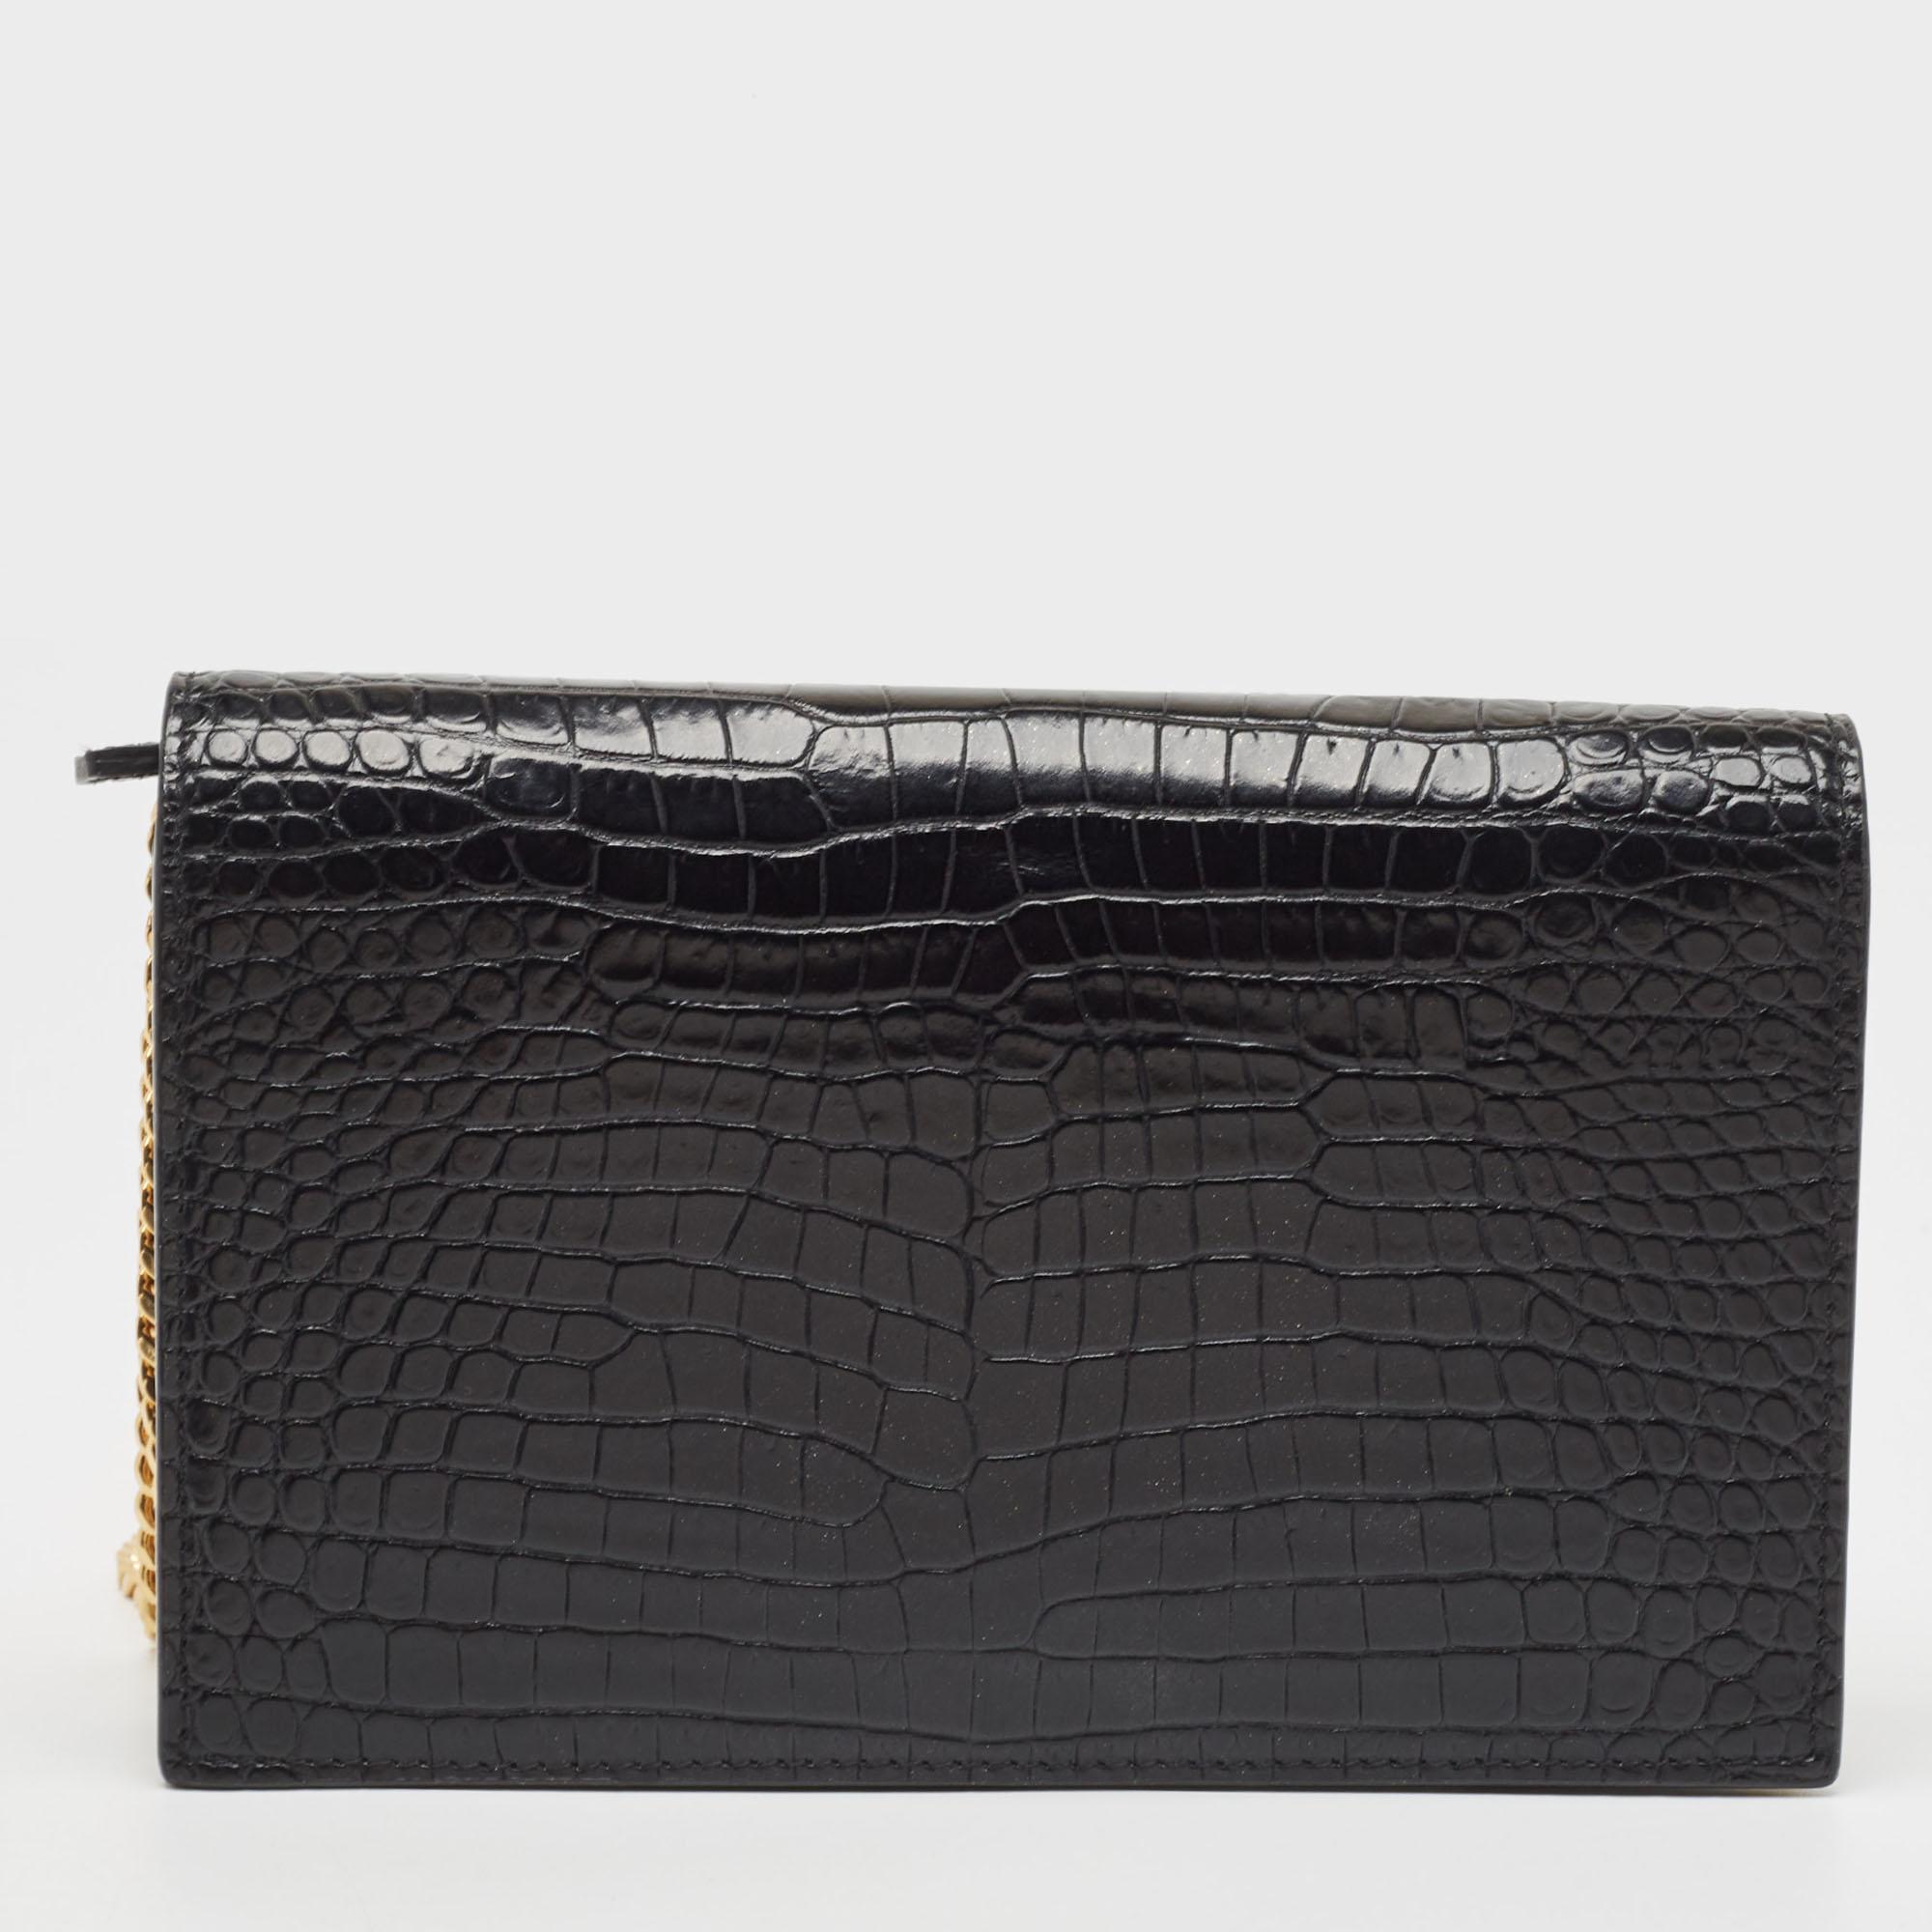 A charming companion for your next evening party, this Saint Laurent Kate chain wallet is a well-crafted design. It can be carried in a chic way with the chain shoulder strap, and its interior will keep your valuables in a refined way. . Created